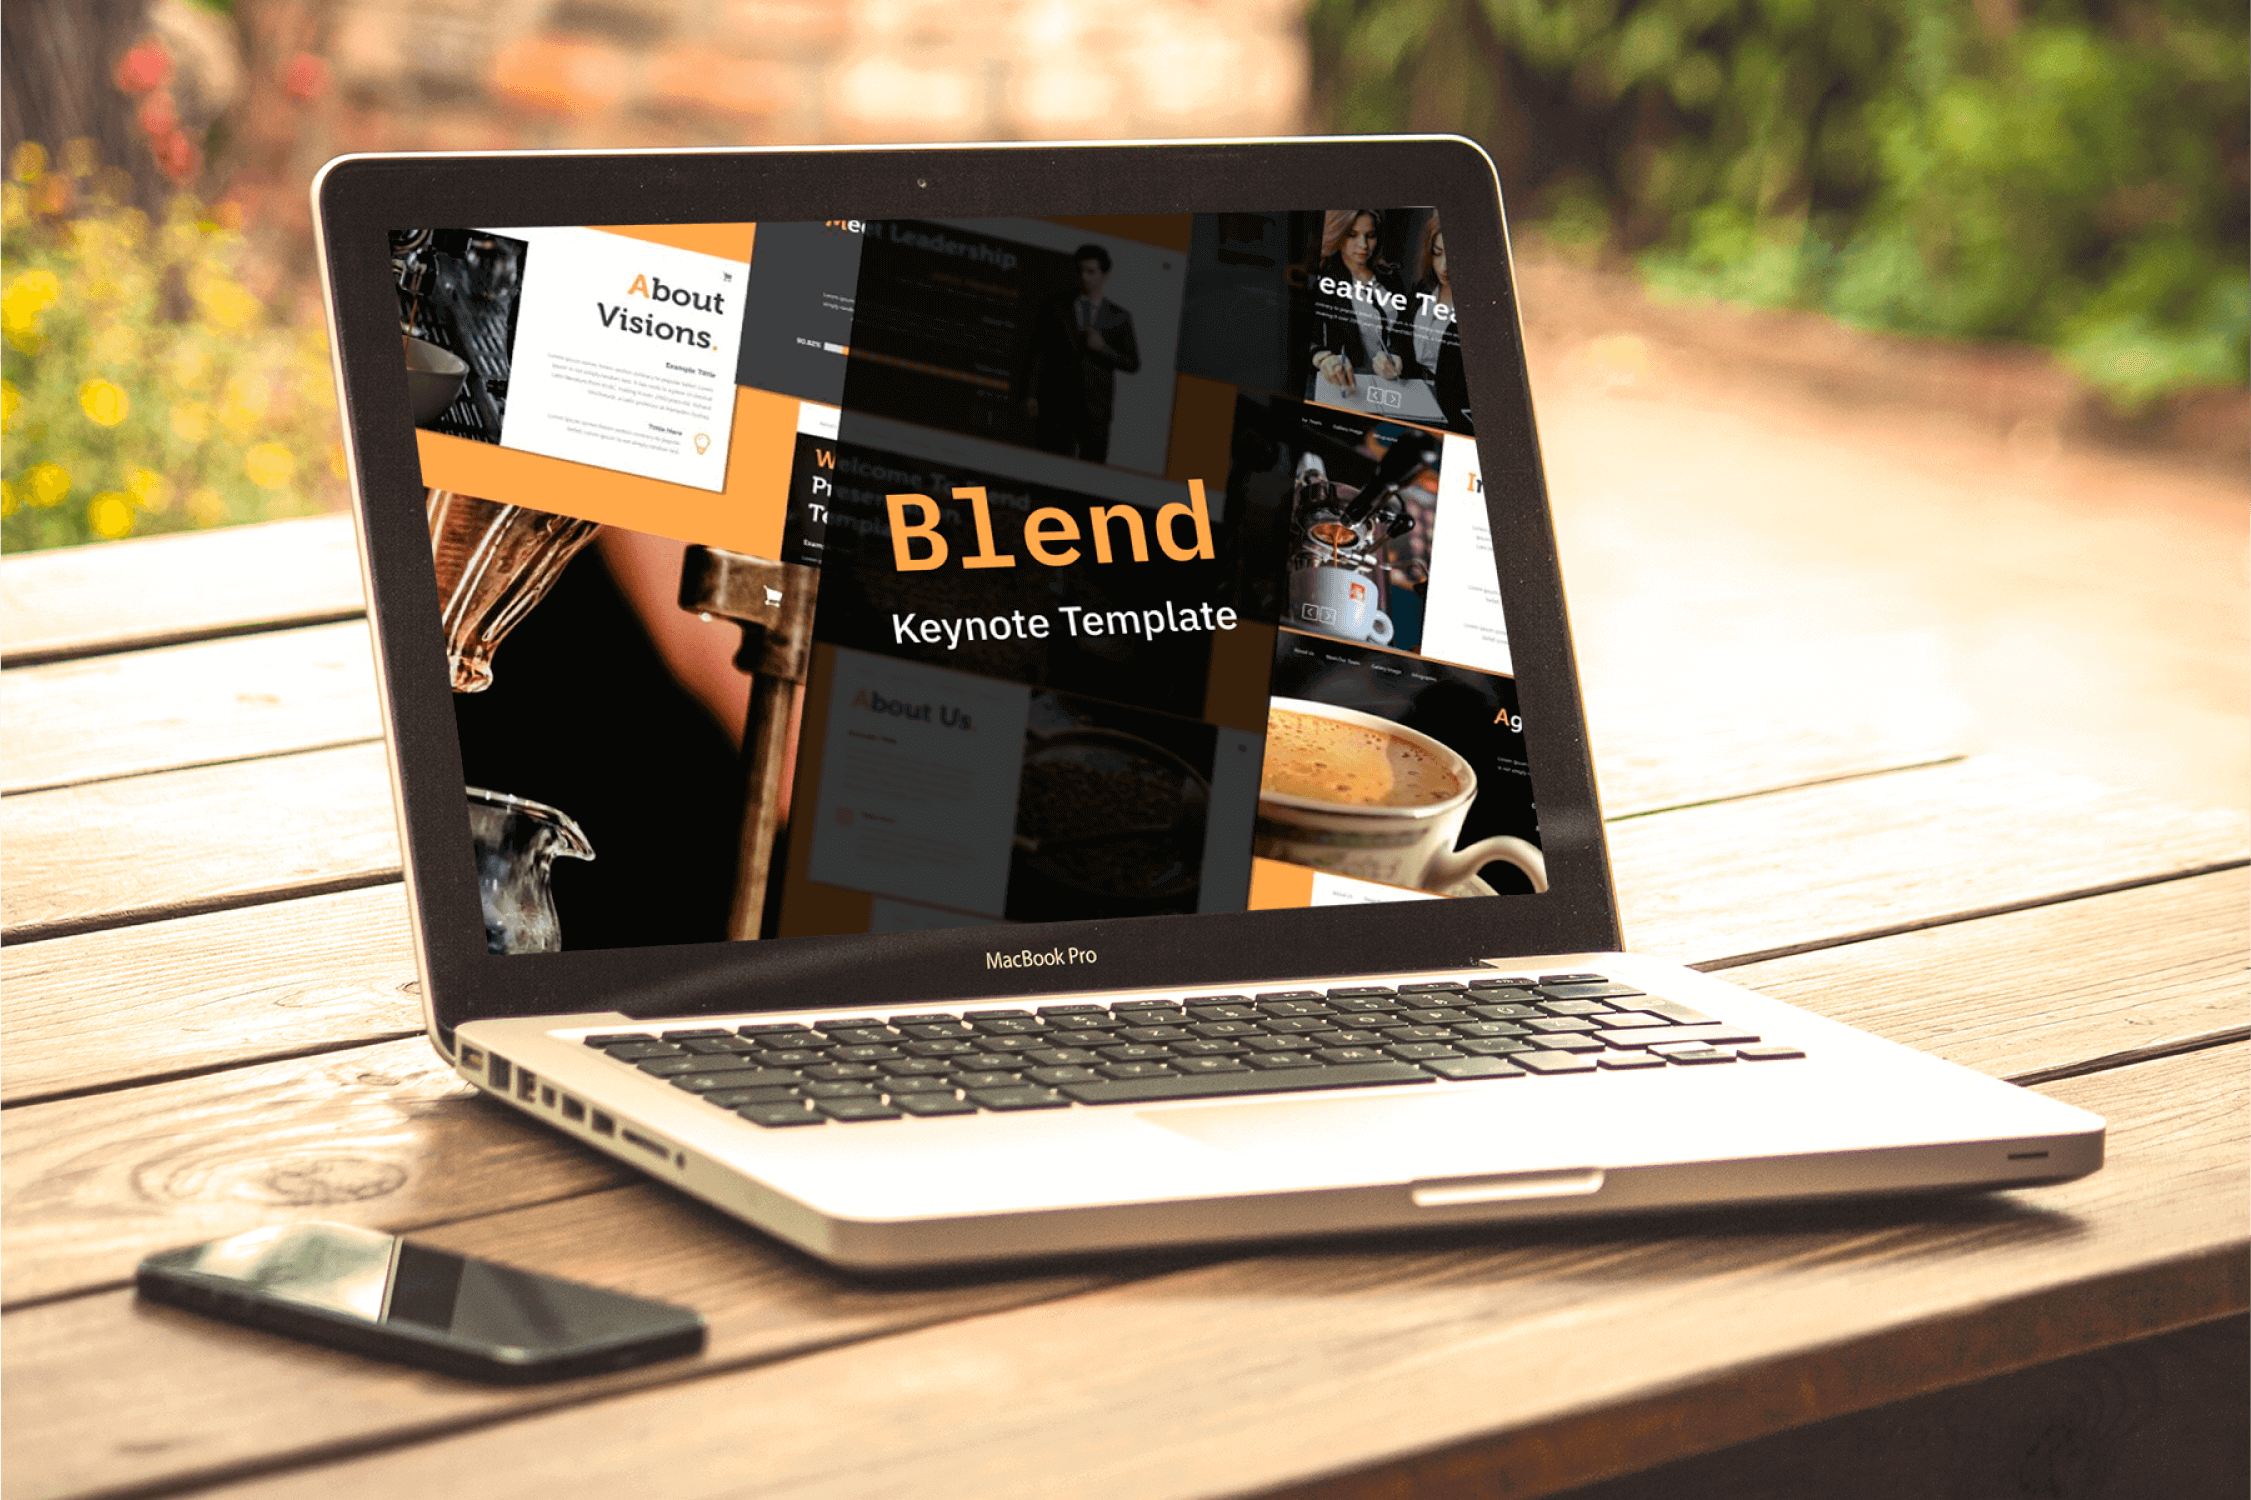 Preview Blend Keynote Template on Notebook.